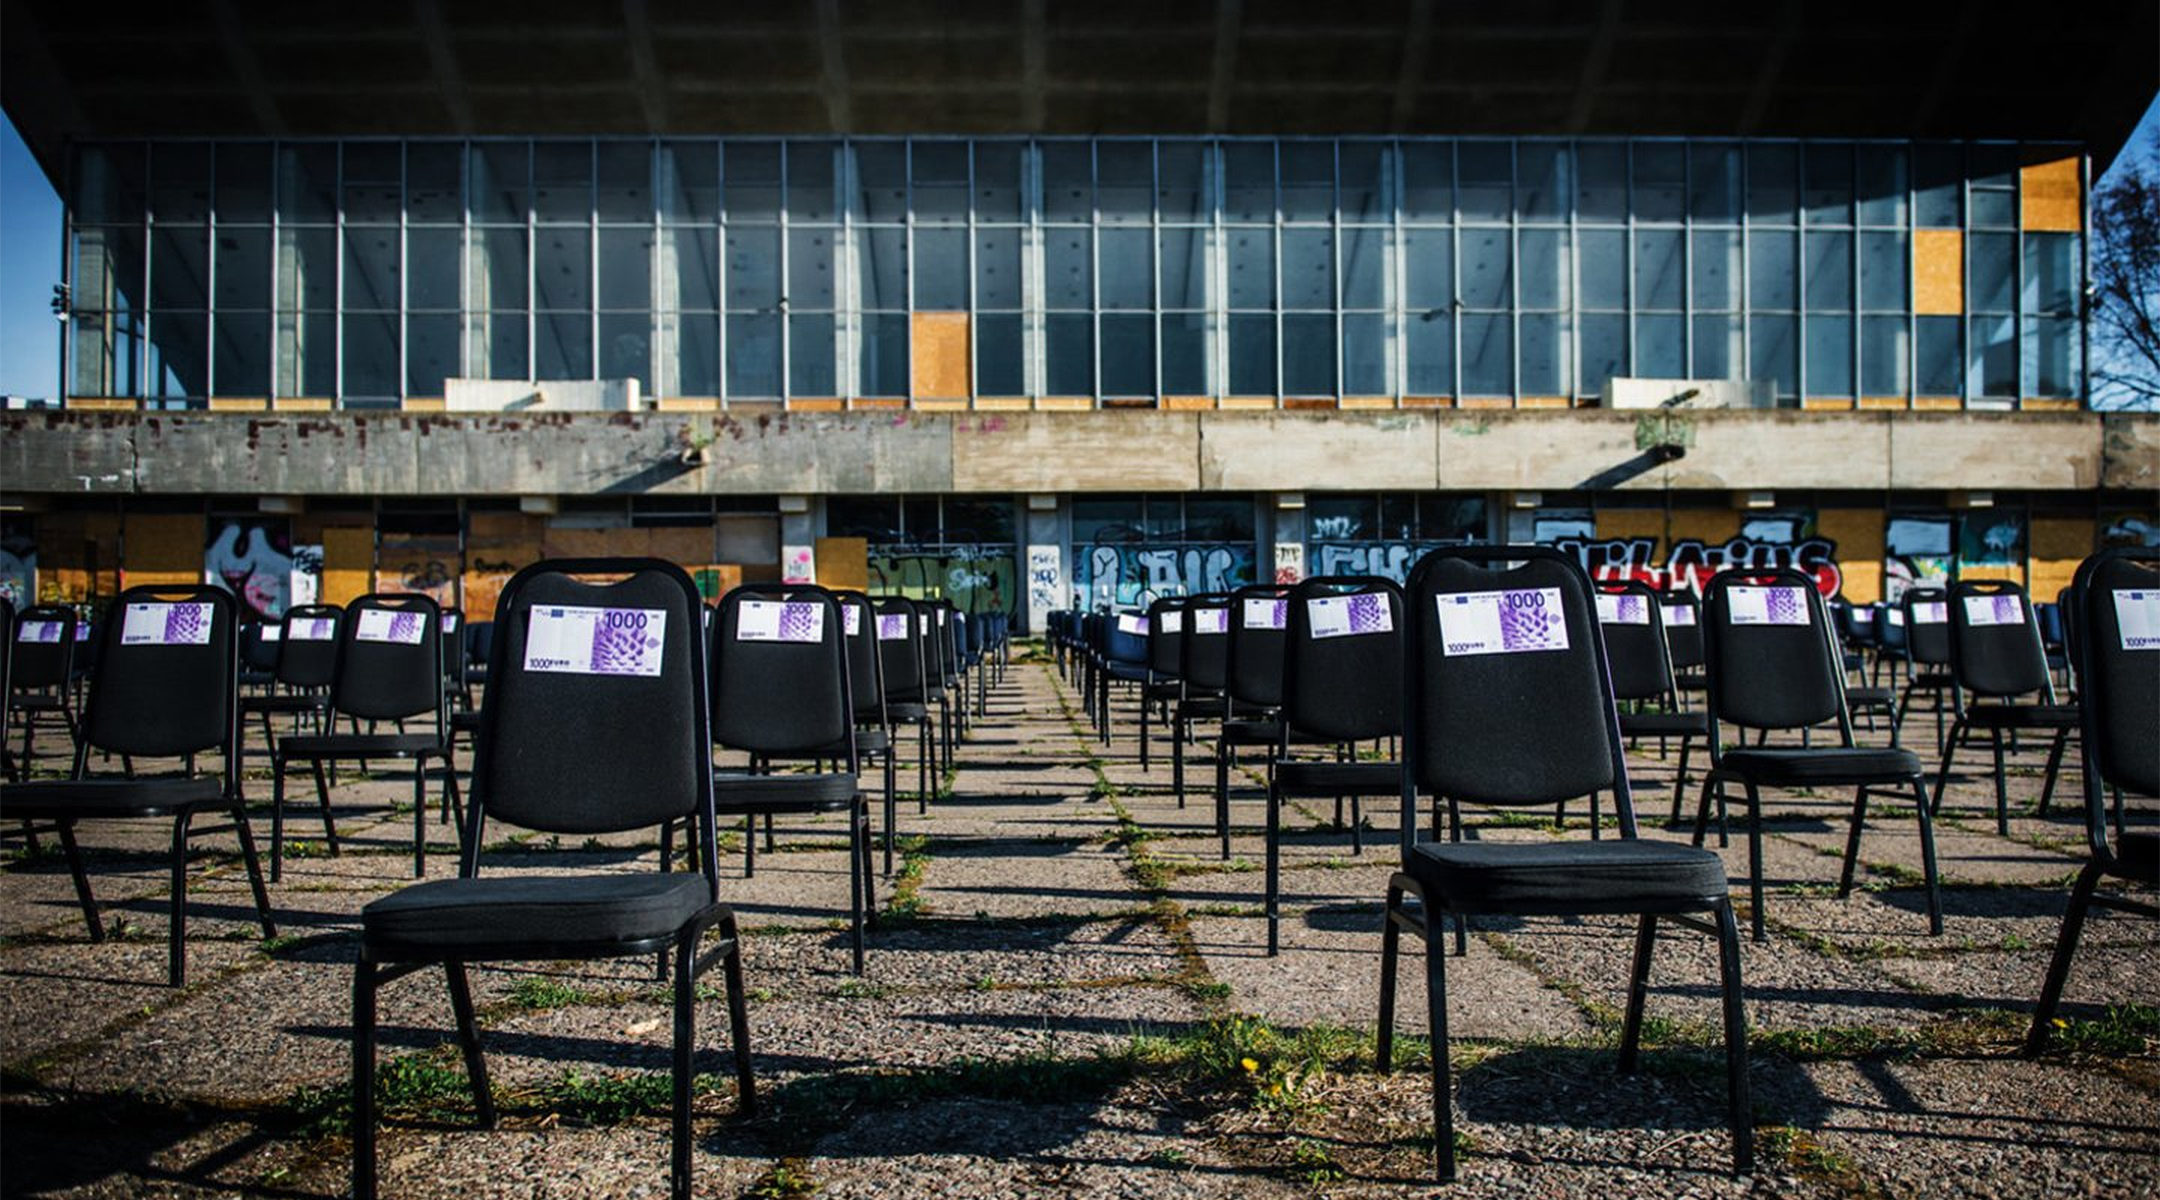 Chairs with fake money notes standing next to the decaying Palace of Concerts and Sports of Vilnius, Lithuania on May 1, 2020. (Courtesy of the display's organizers)